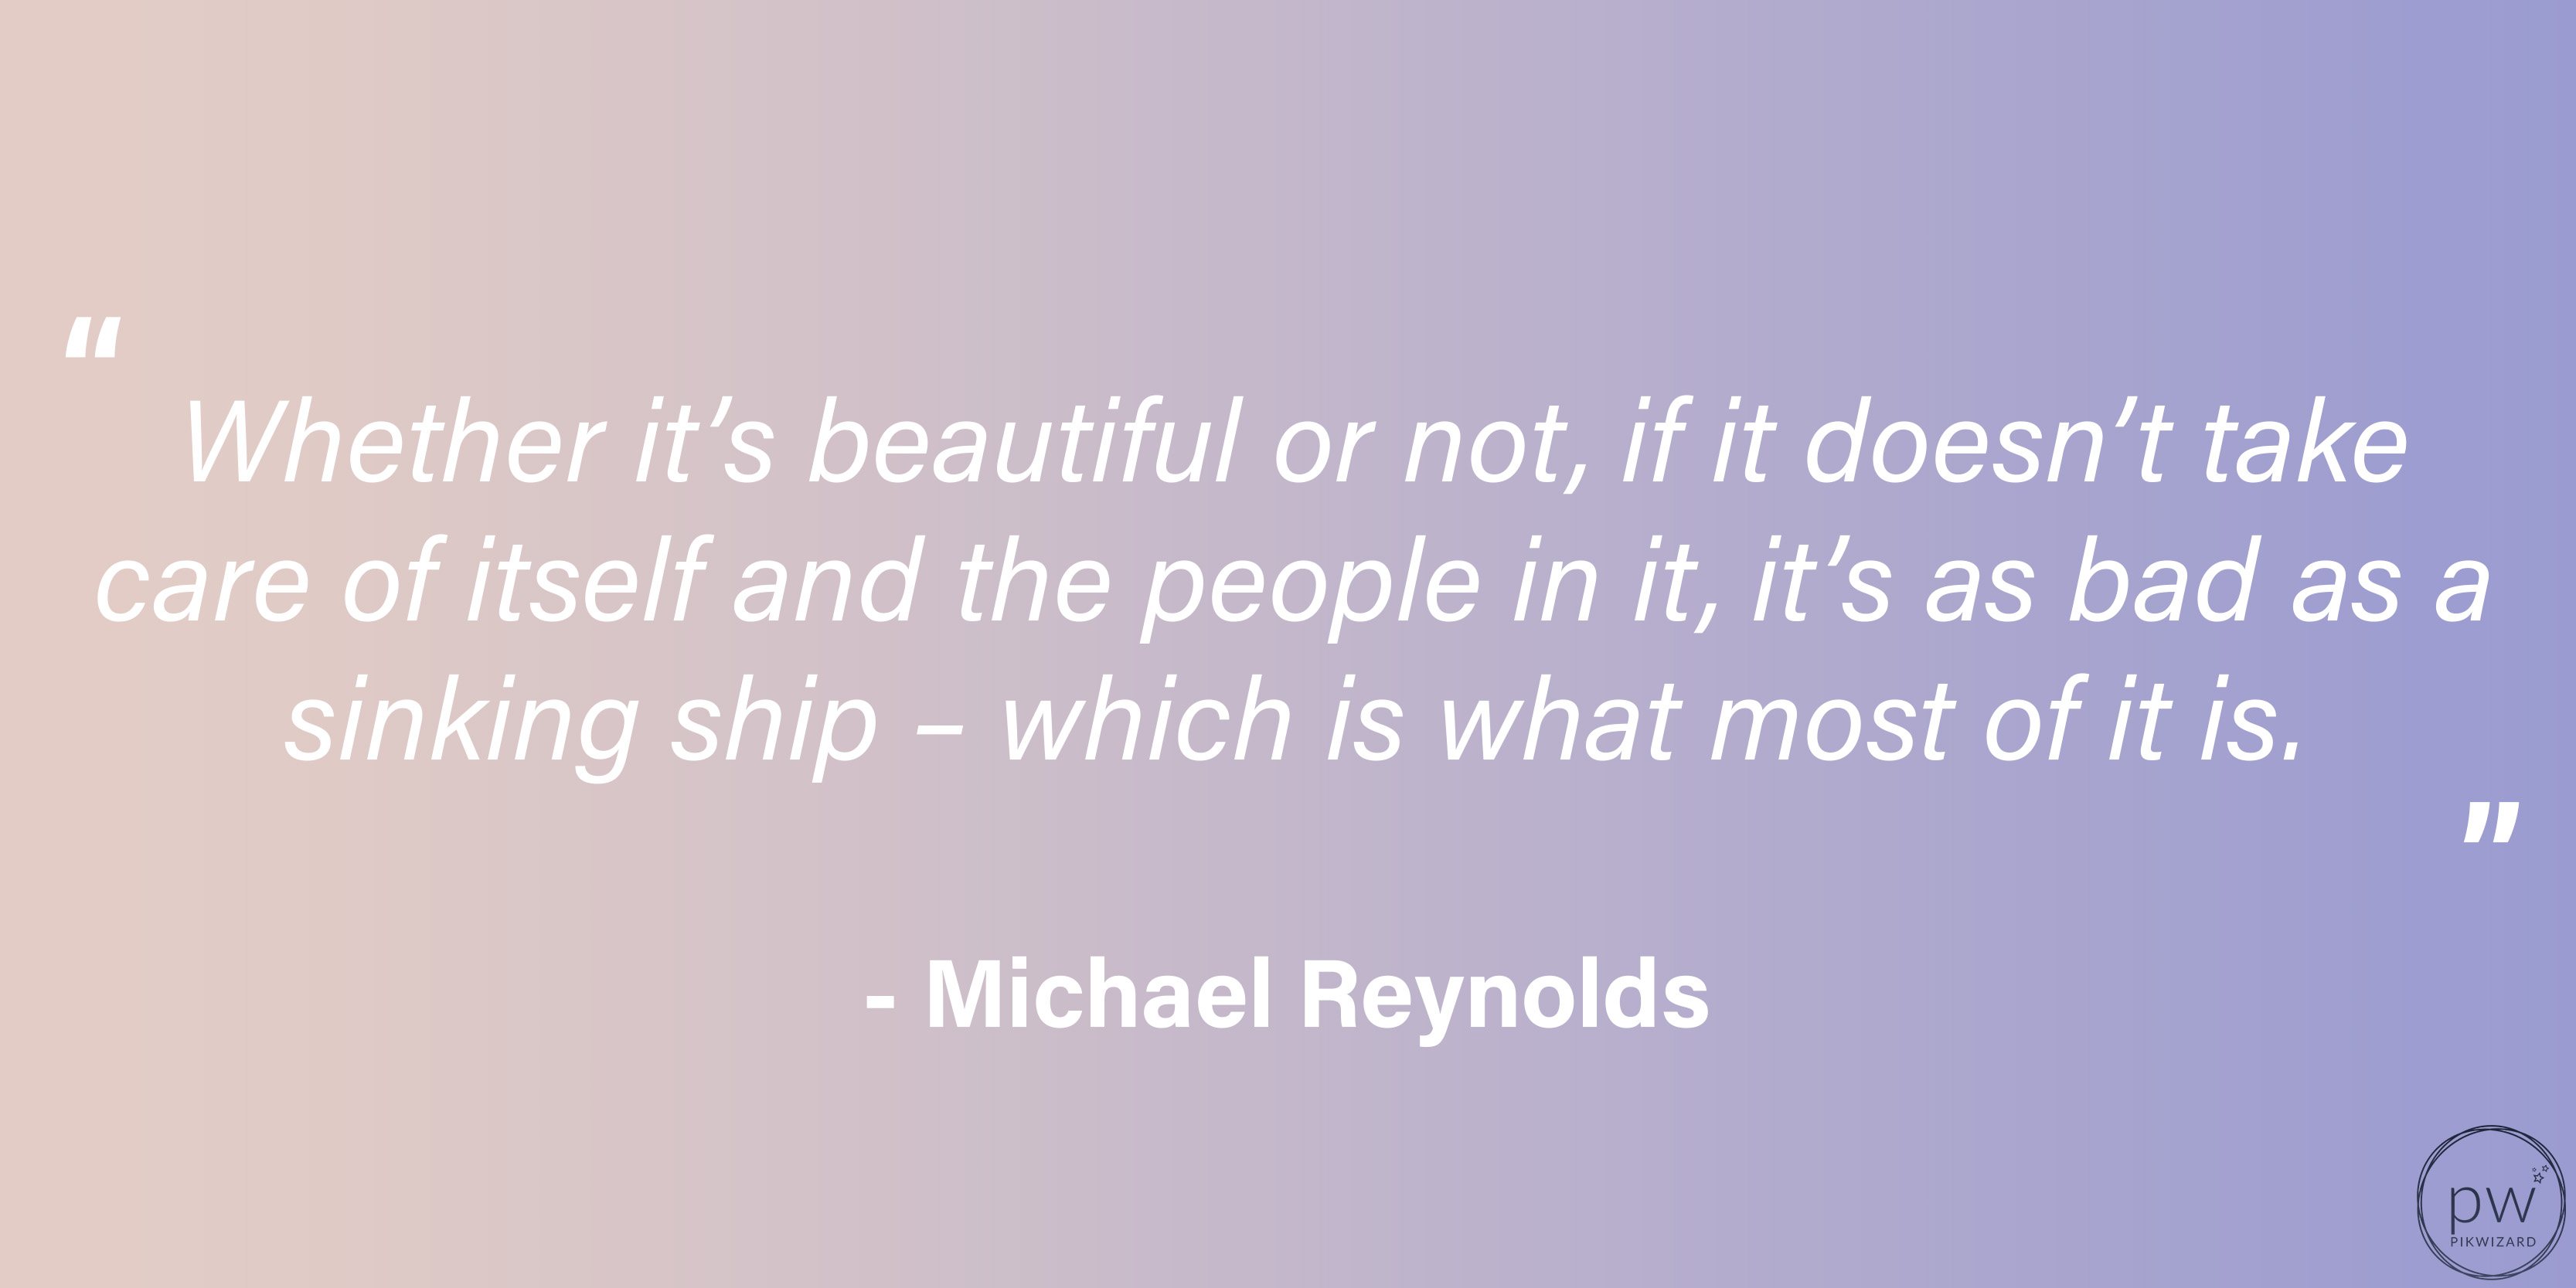 Michael Reynolds quote on a purple and pink gradient background - Sustainable design - Image